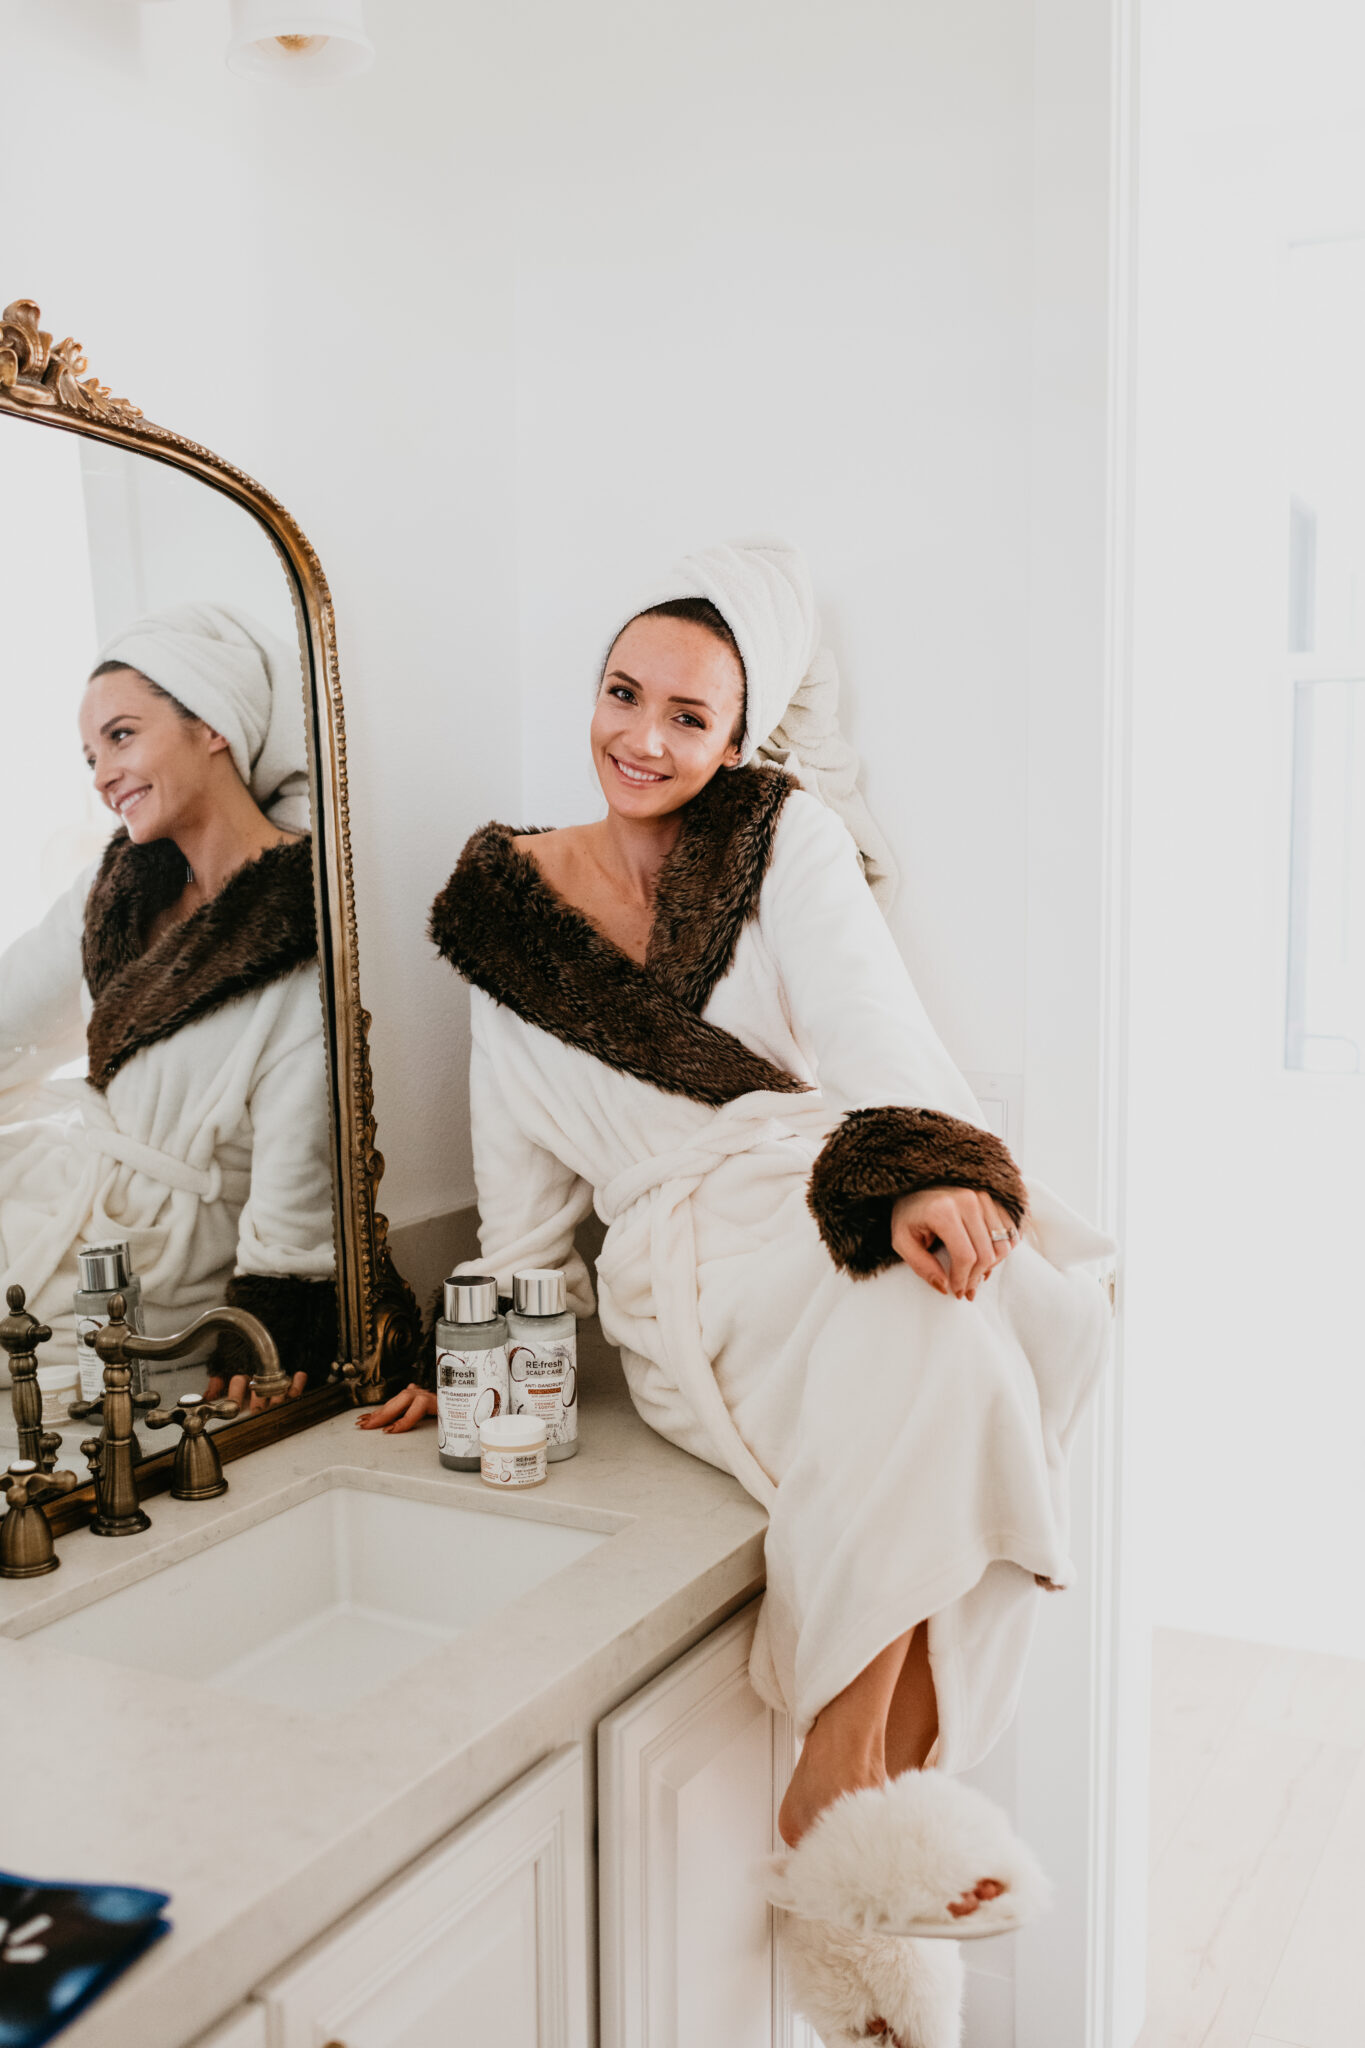 Re-fresh scalp care review: the best products for dandruff. A review featured by top Las Vegas beauty blog, Outfits and Outings | Re-Fresh Scalp Care by popular Las Vegas hair and beauty blog, Outfits and Outings: image of a woman wearing a white bathrobe and sitting on her bathroom counter next to some Re-Fresh Scalp Care products.